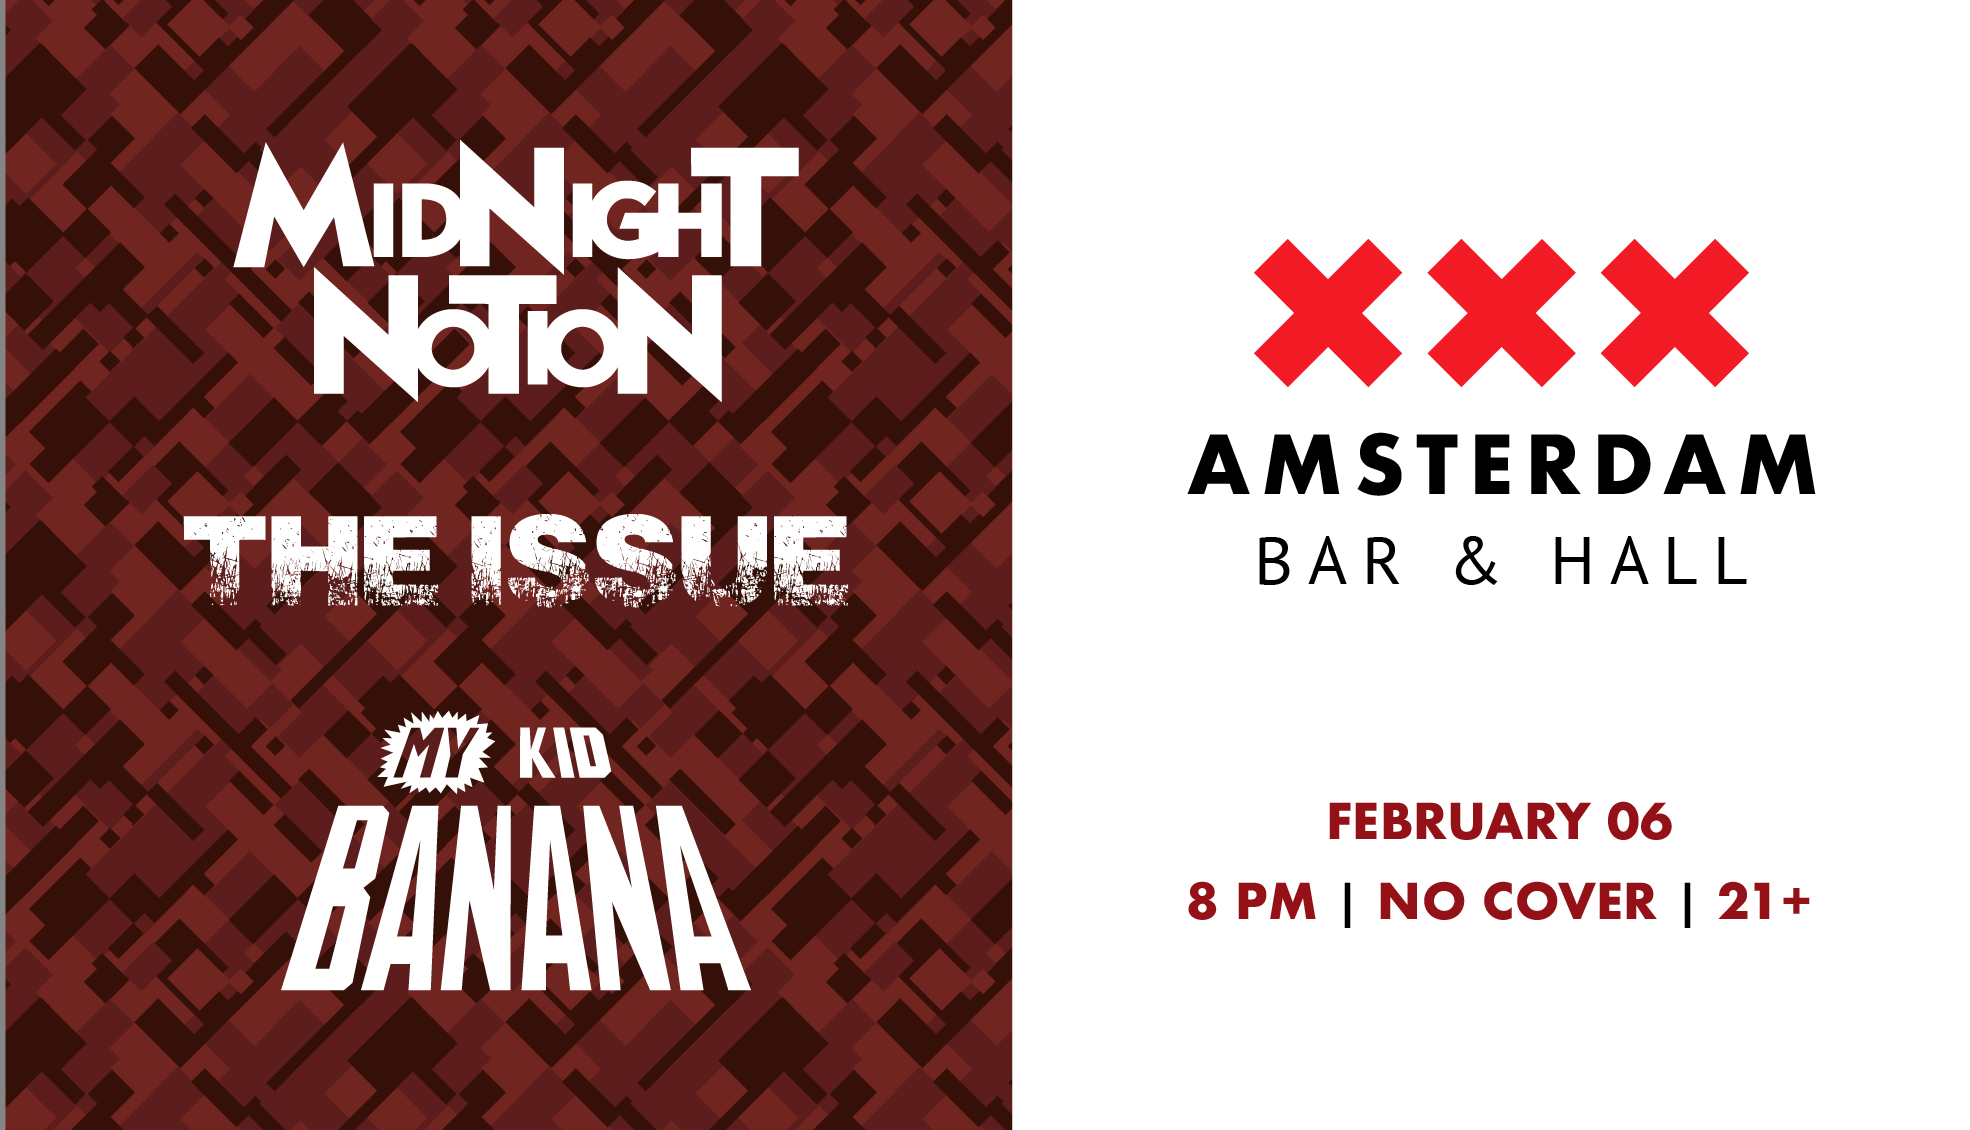 Midnight Notion, The Issue & My Kid Banana at Amsterdam